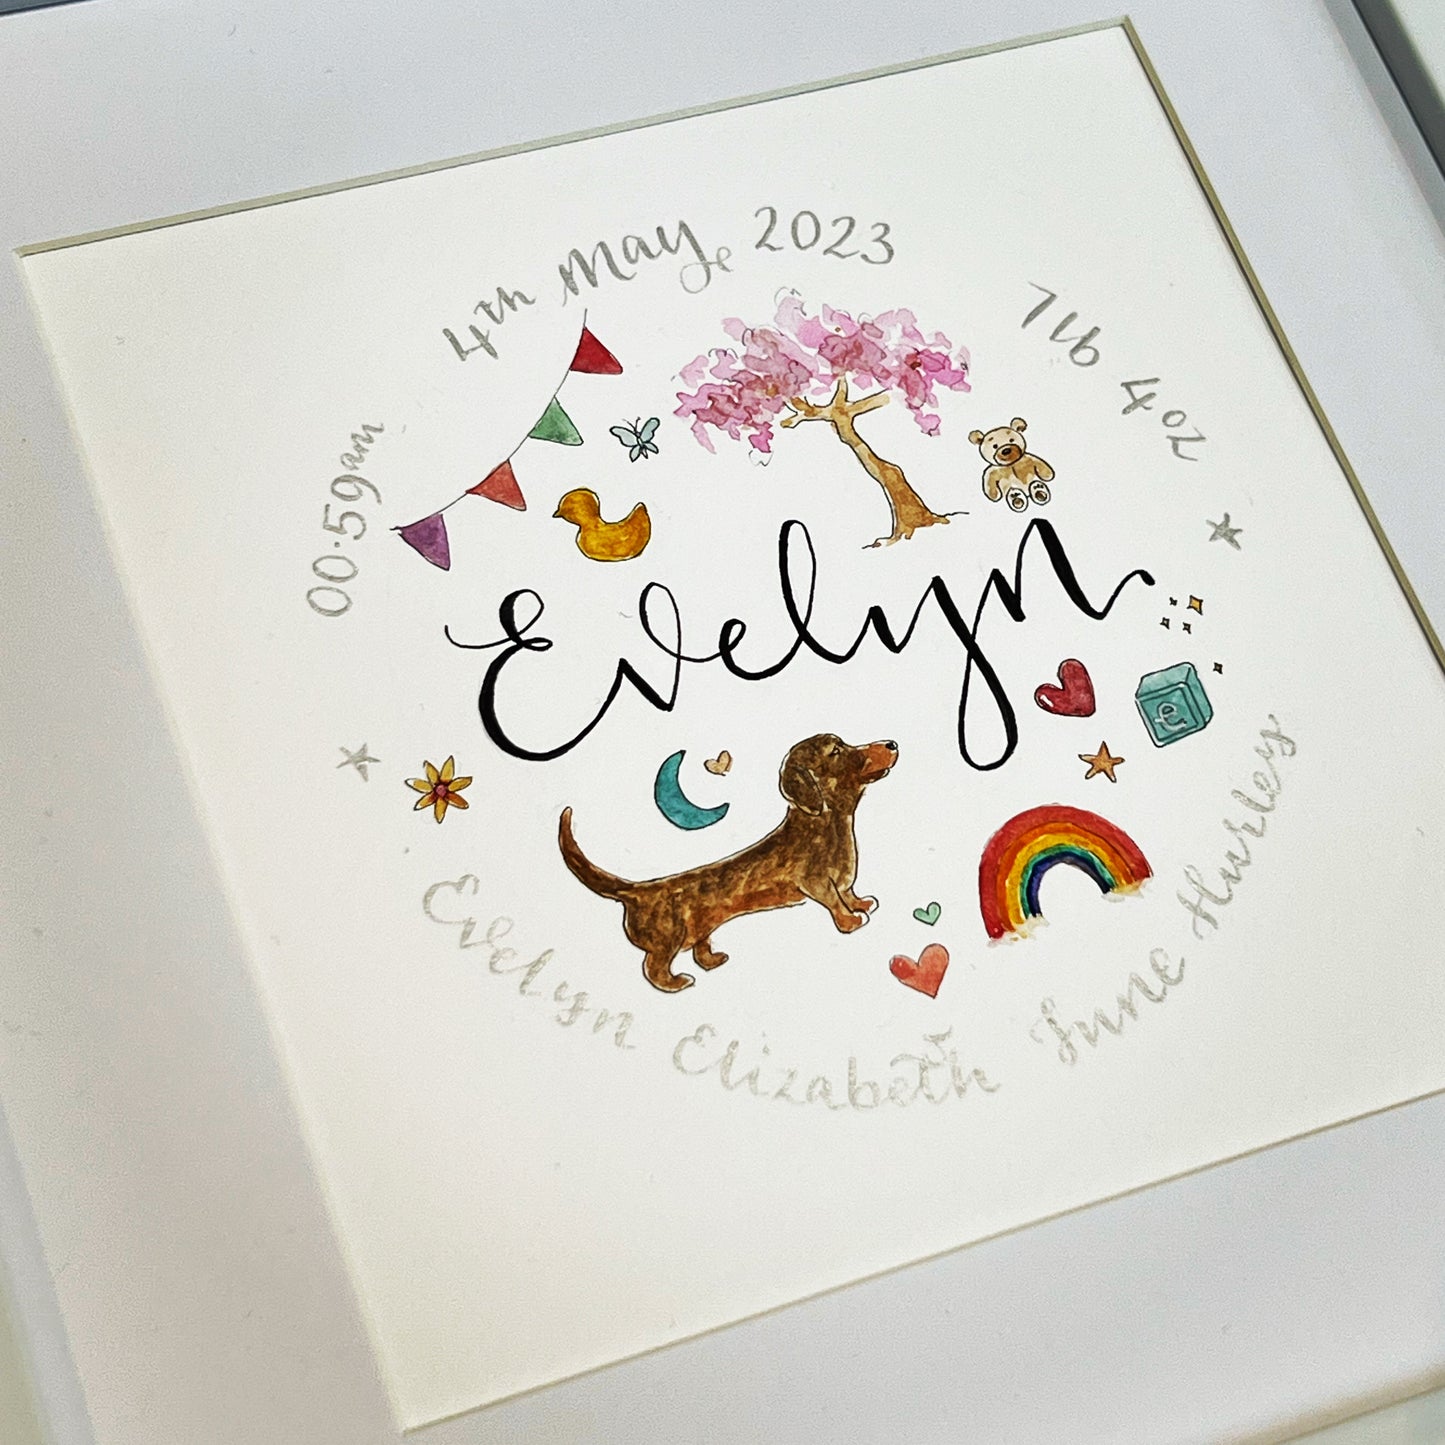 doodle art framed gift new baby personalised watercolour and calligraphy